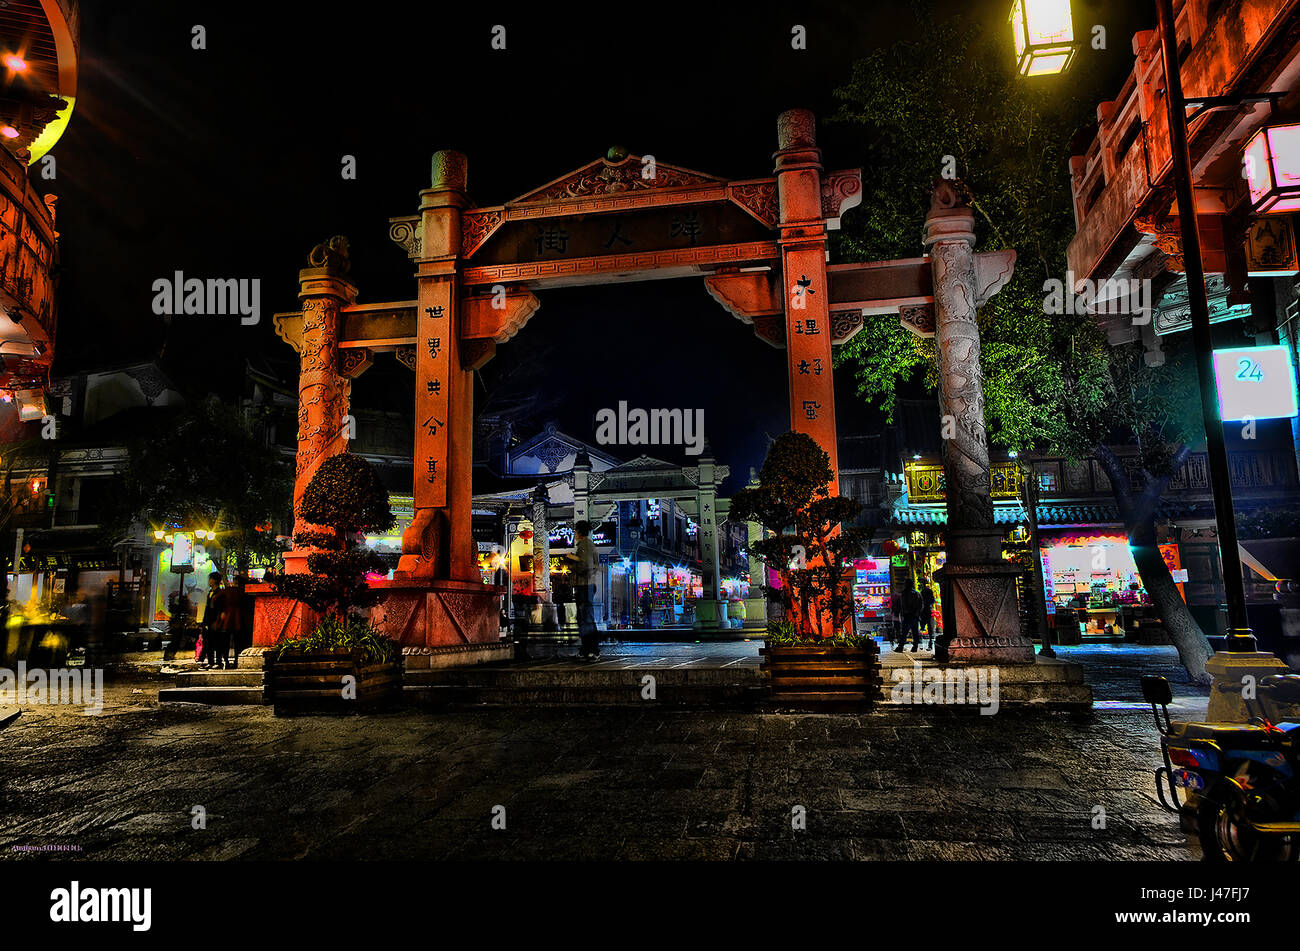 Old town gate in Dali, Yunnan, China. Fancy style image. Stock Photo